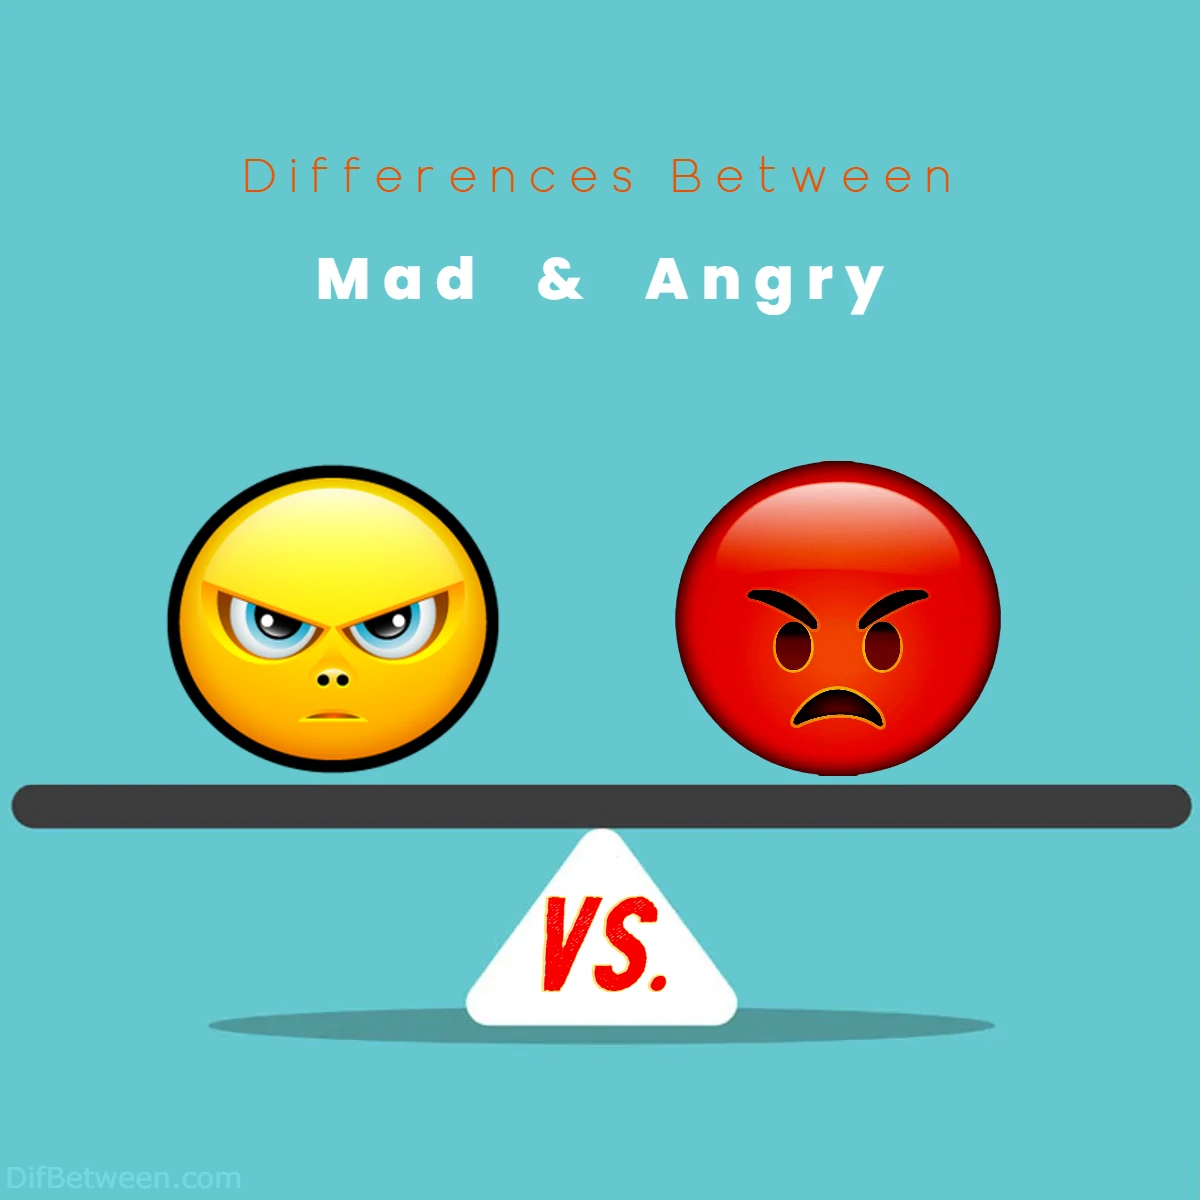 Differences Between Mad vs Angry